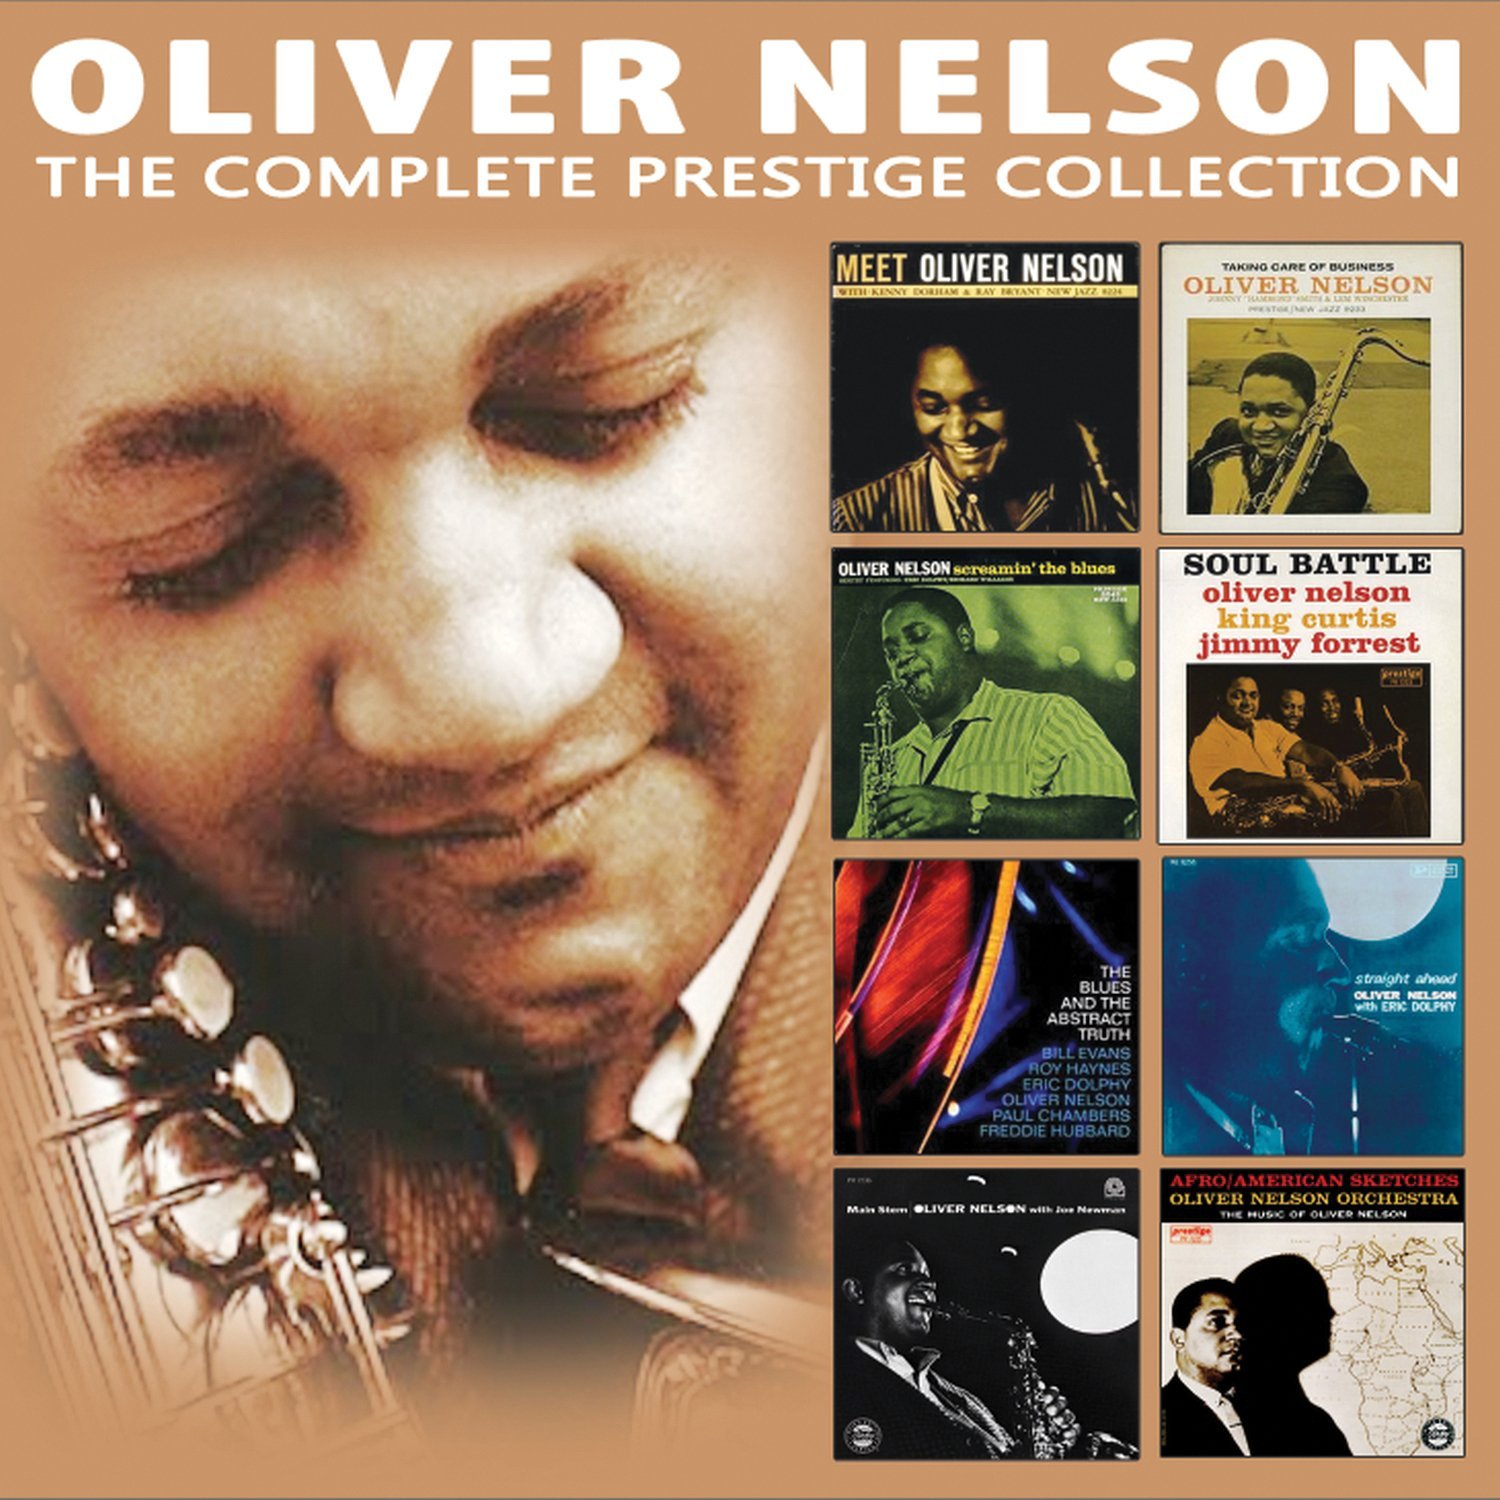 OLIVER NELSON - The Complete Prestige Collection cover 